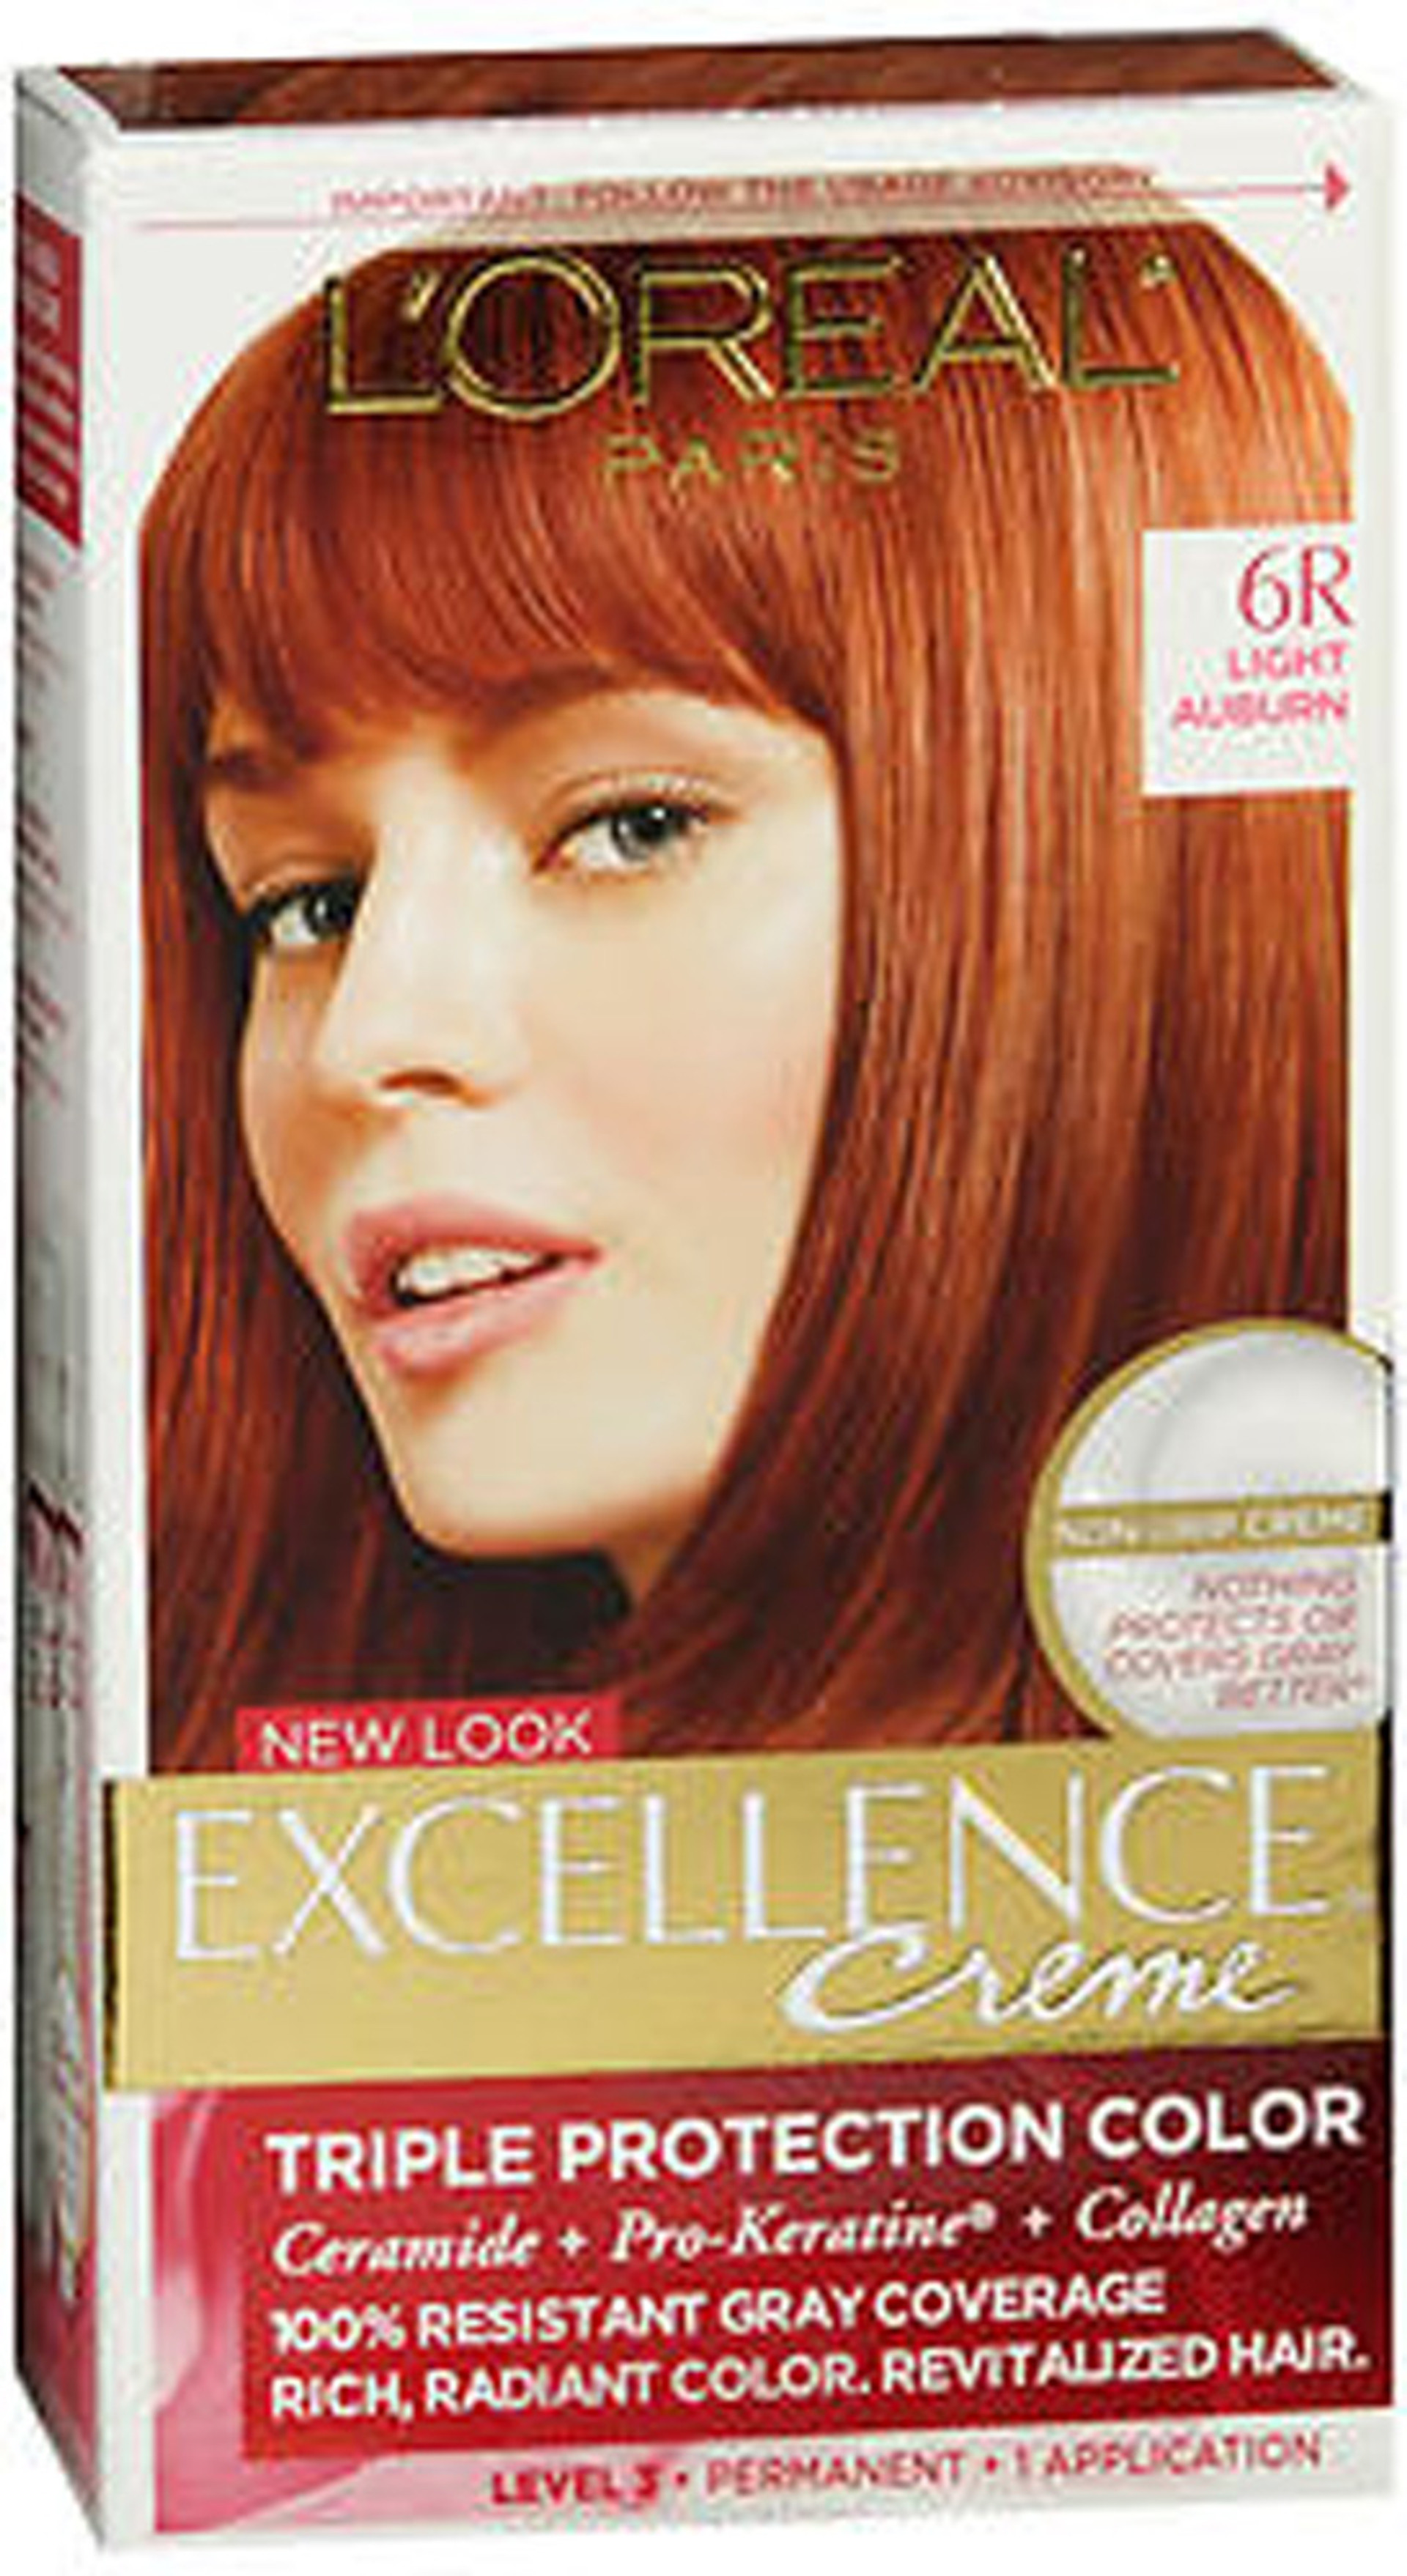 L'Oreal Excellence Creme 8-1/2A Champagne Blonde - The Online Drugstore